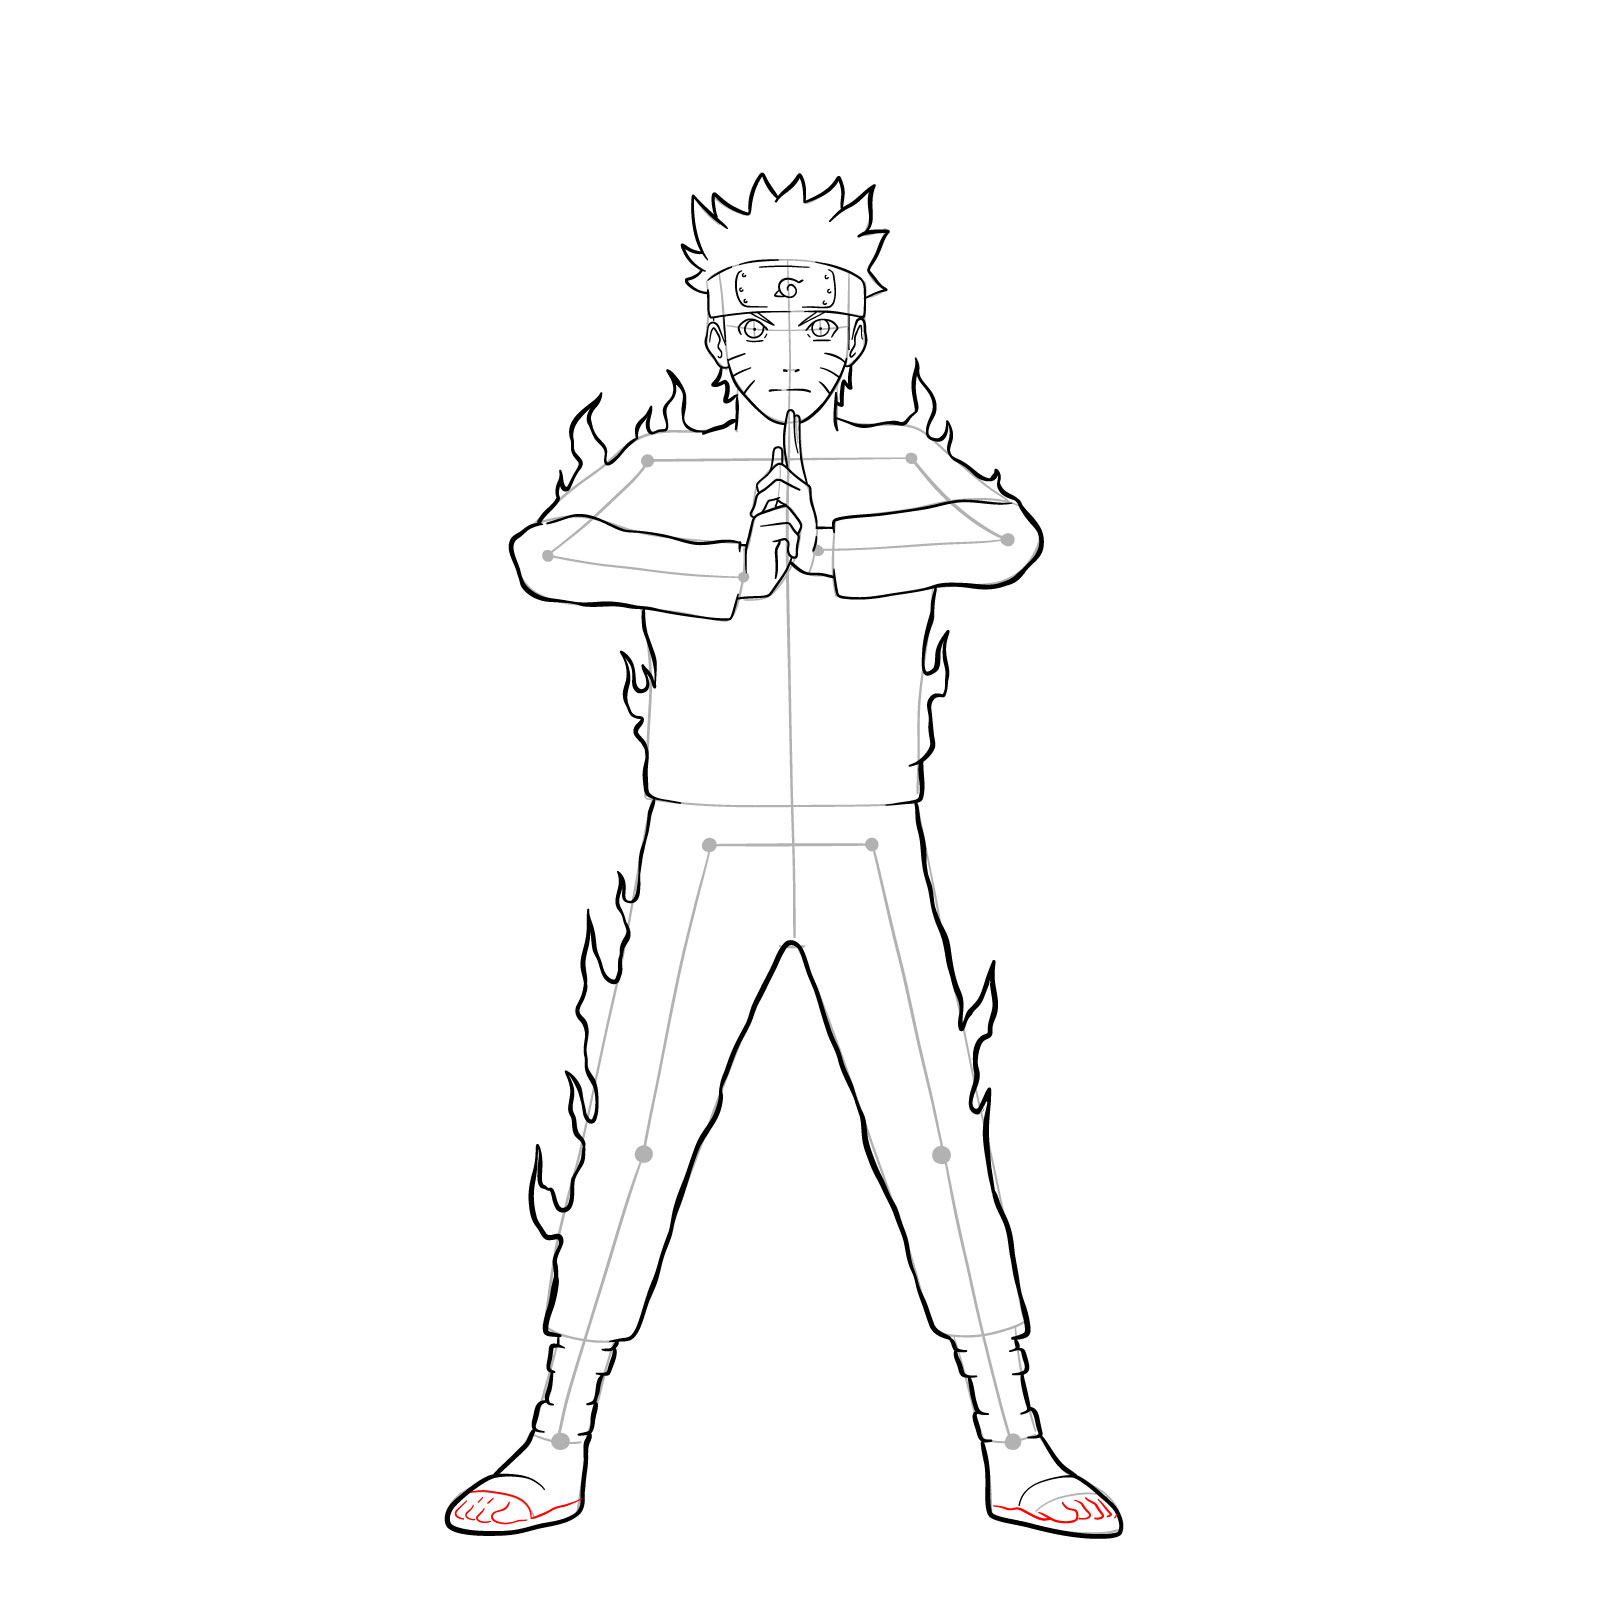 How to draw Naruto in Nine-Tails Chakra Mode - step 27